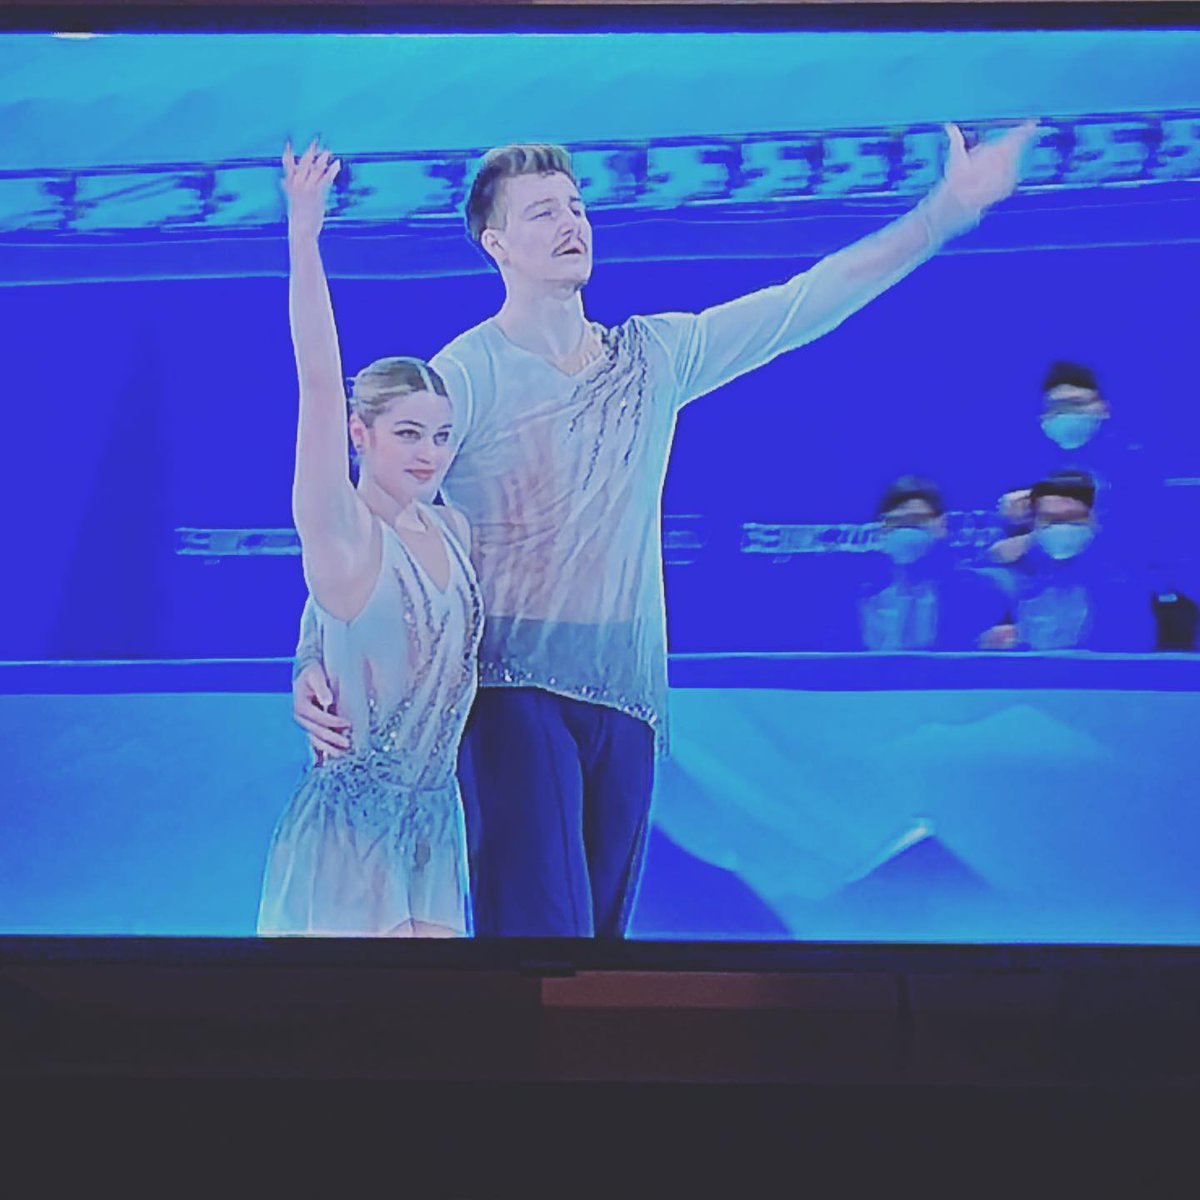 2/4/2022 I broke down and got the premium Peacock streaming so I could actually watch the #winterolympics2022 Excited to see some #figureskating before the opening ceremony later. #365project2022 https://t.co/SxnKWSCSJM